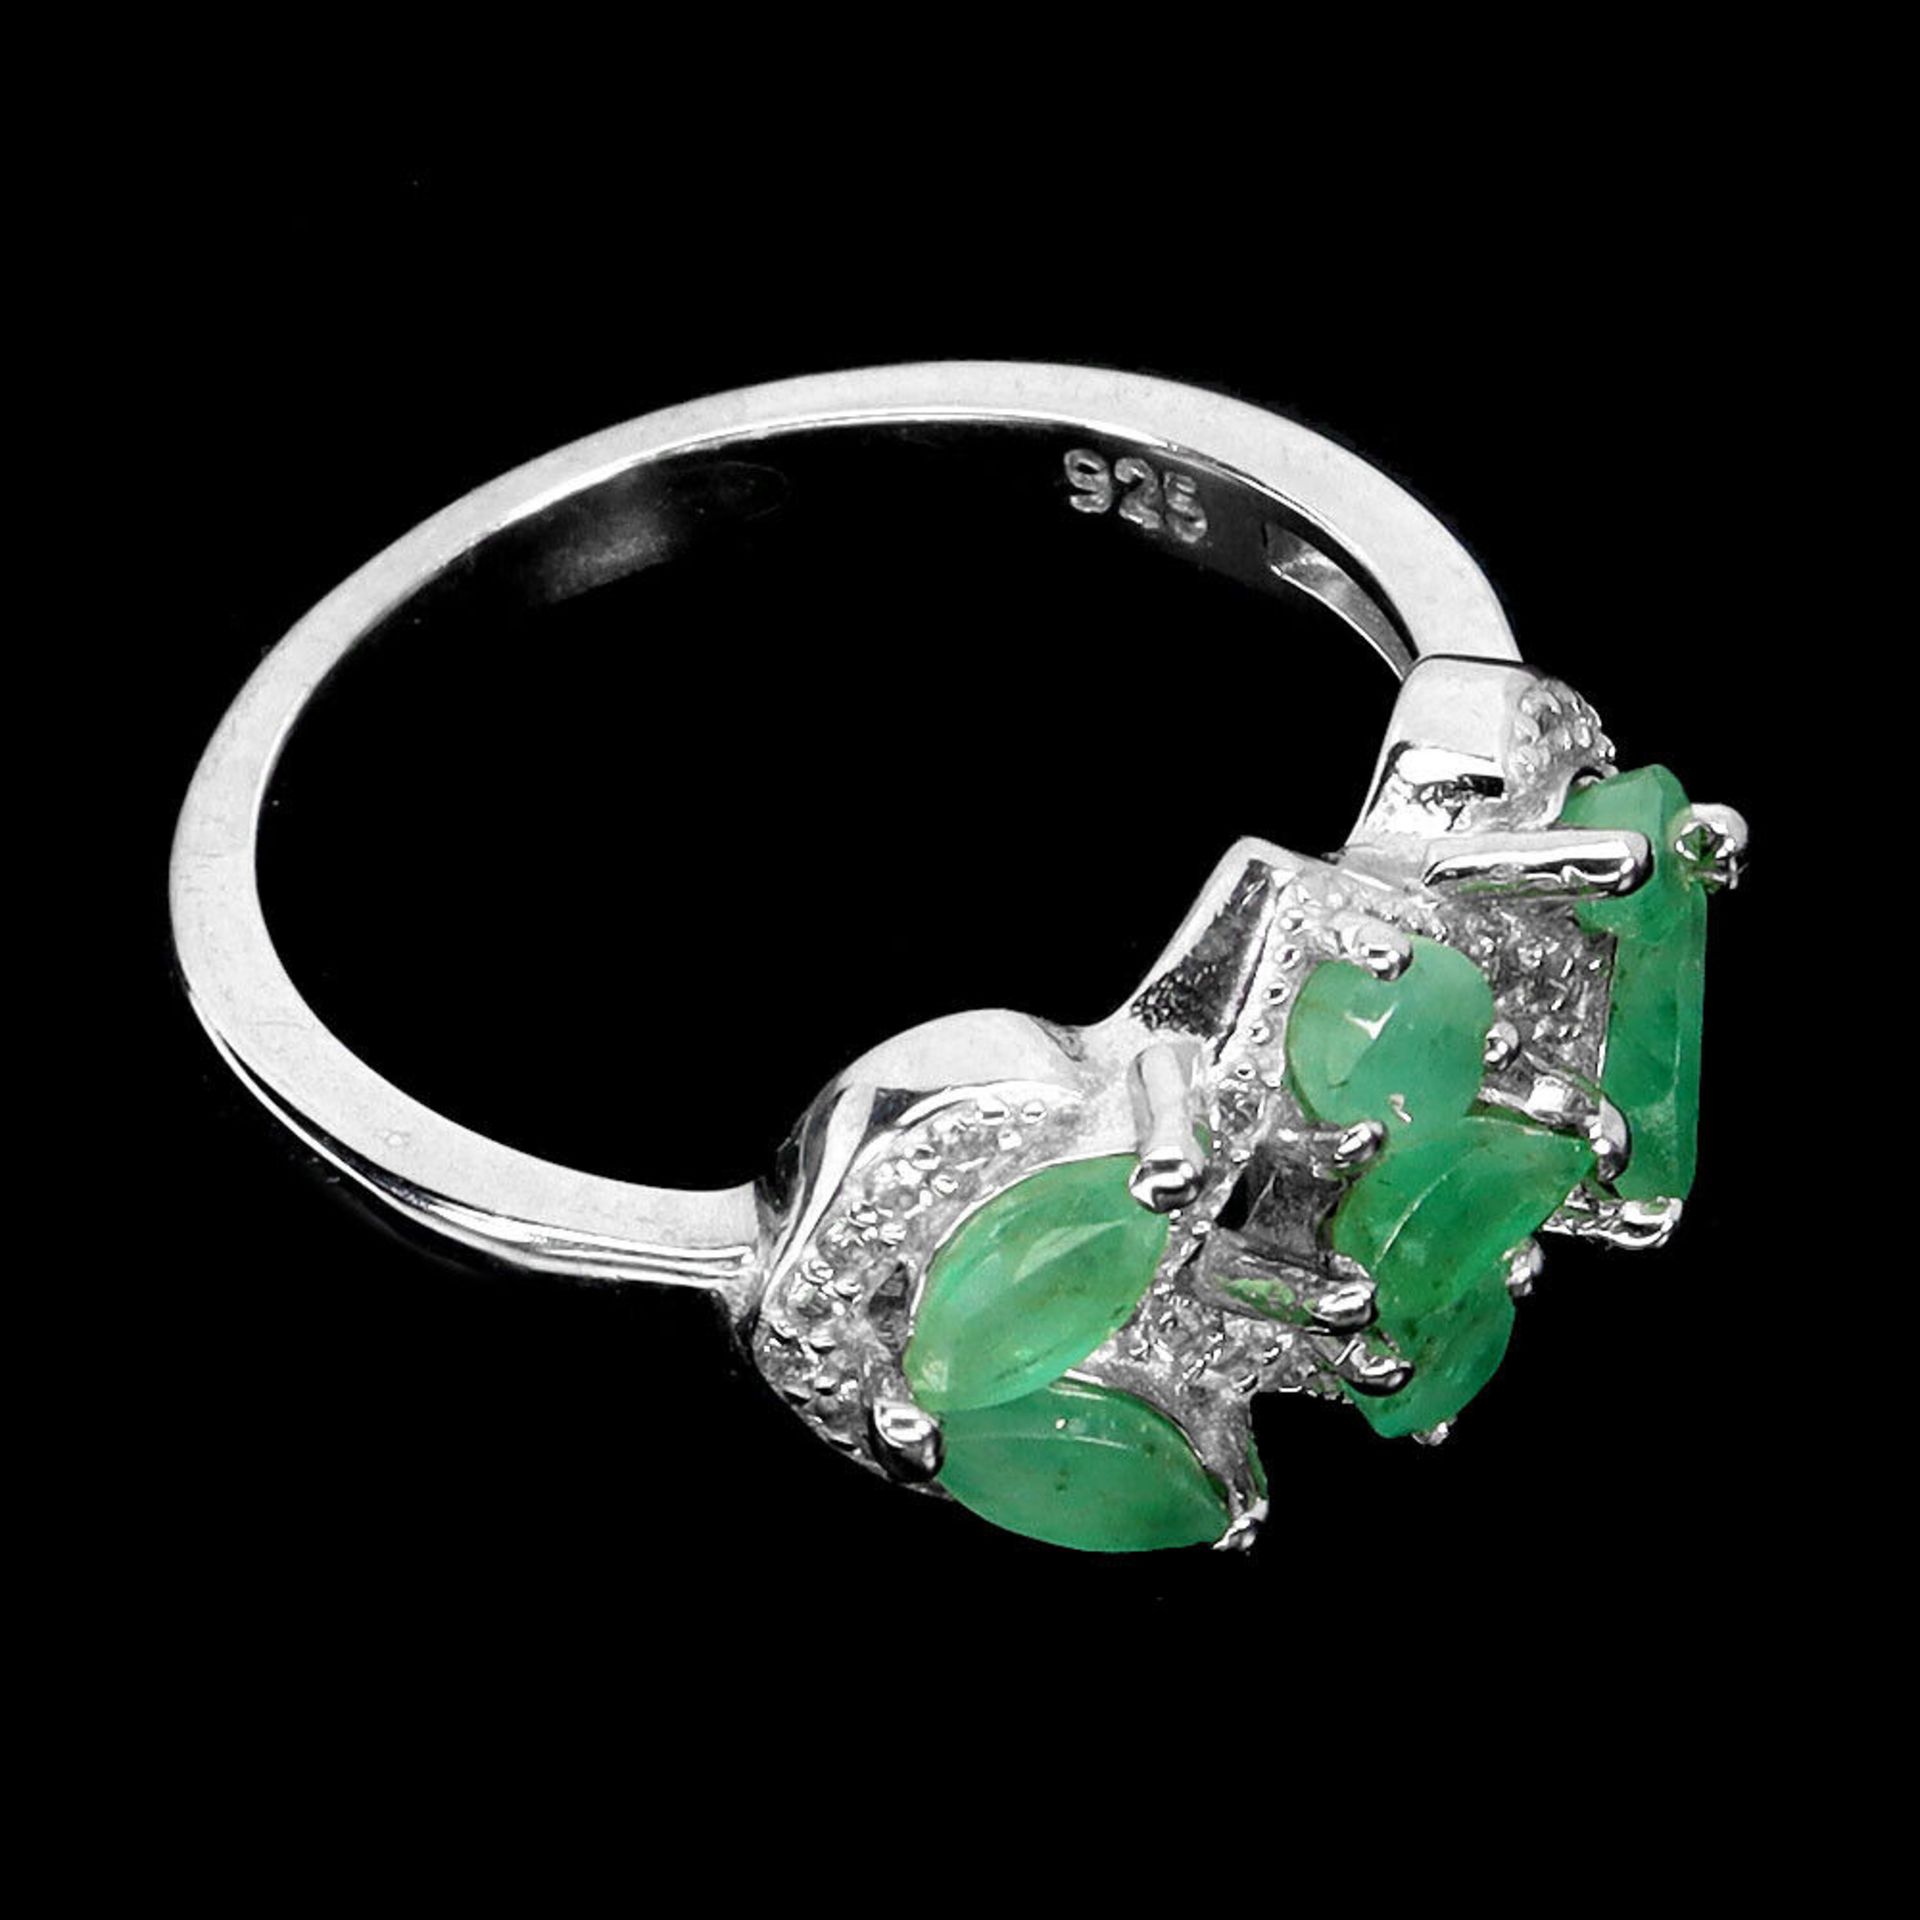 A matching 925 silver ring set with marquise cut emeralds and white stones, ring size N. - Image 3 of 3